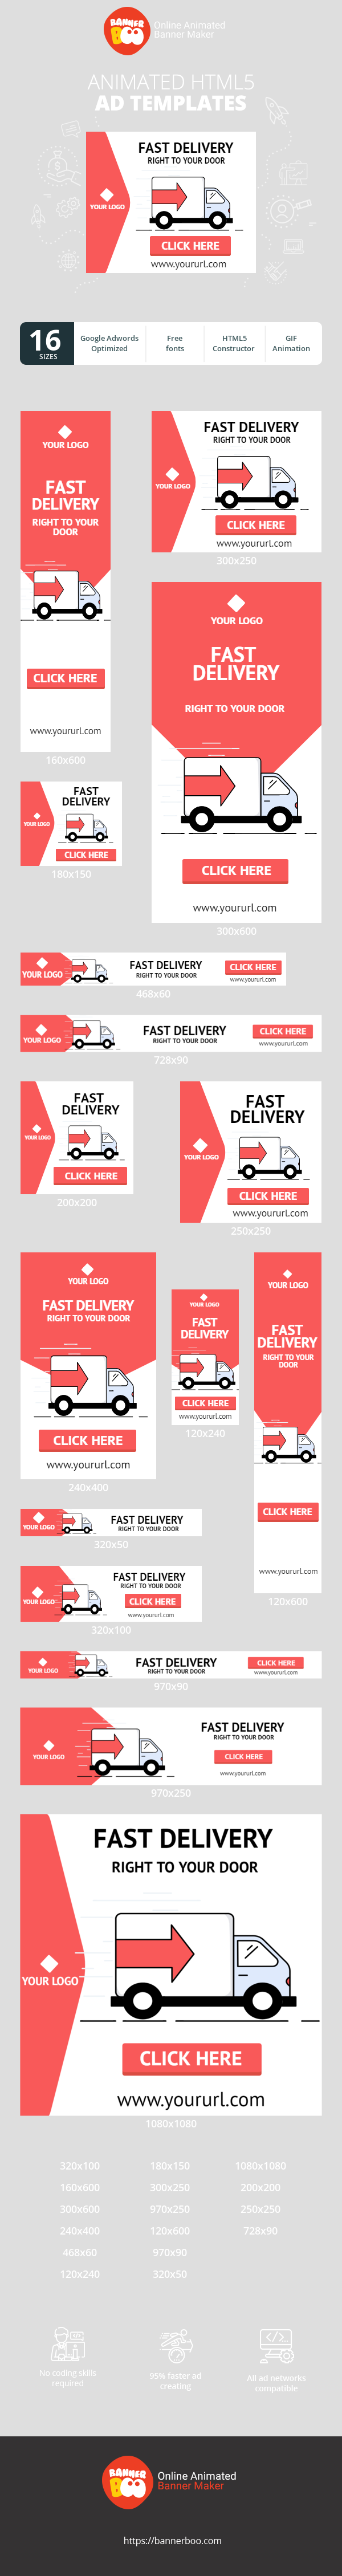 Banner ad template — Fast Delivery — Right to Your Door